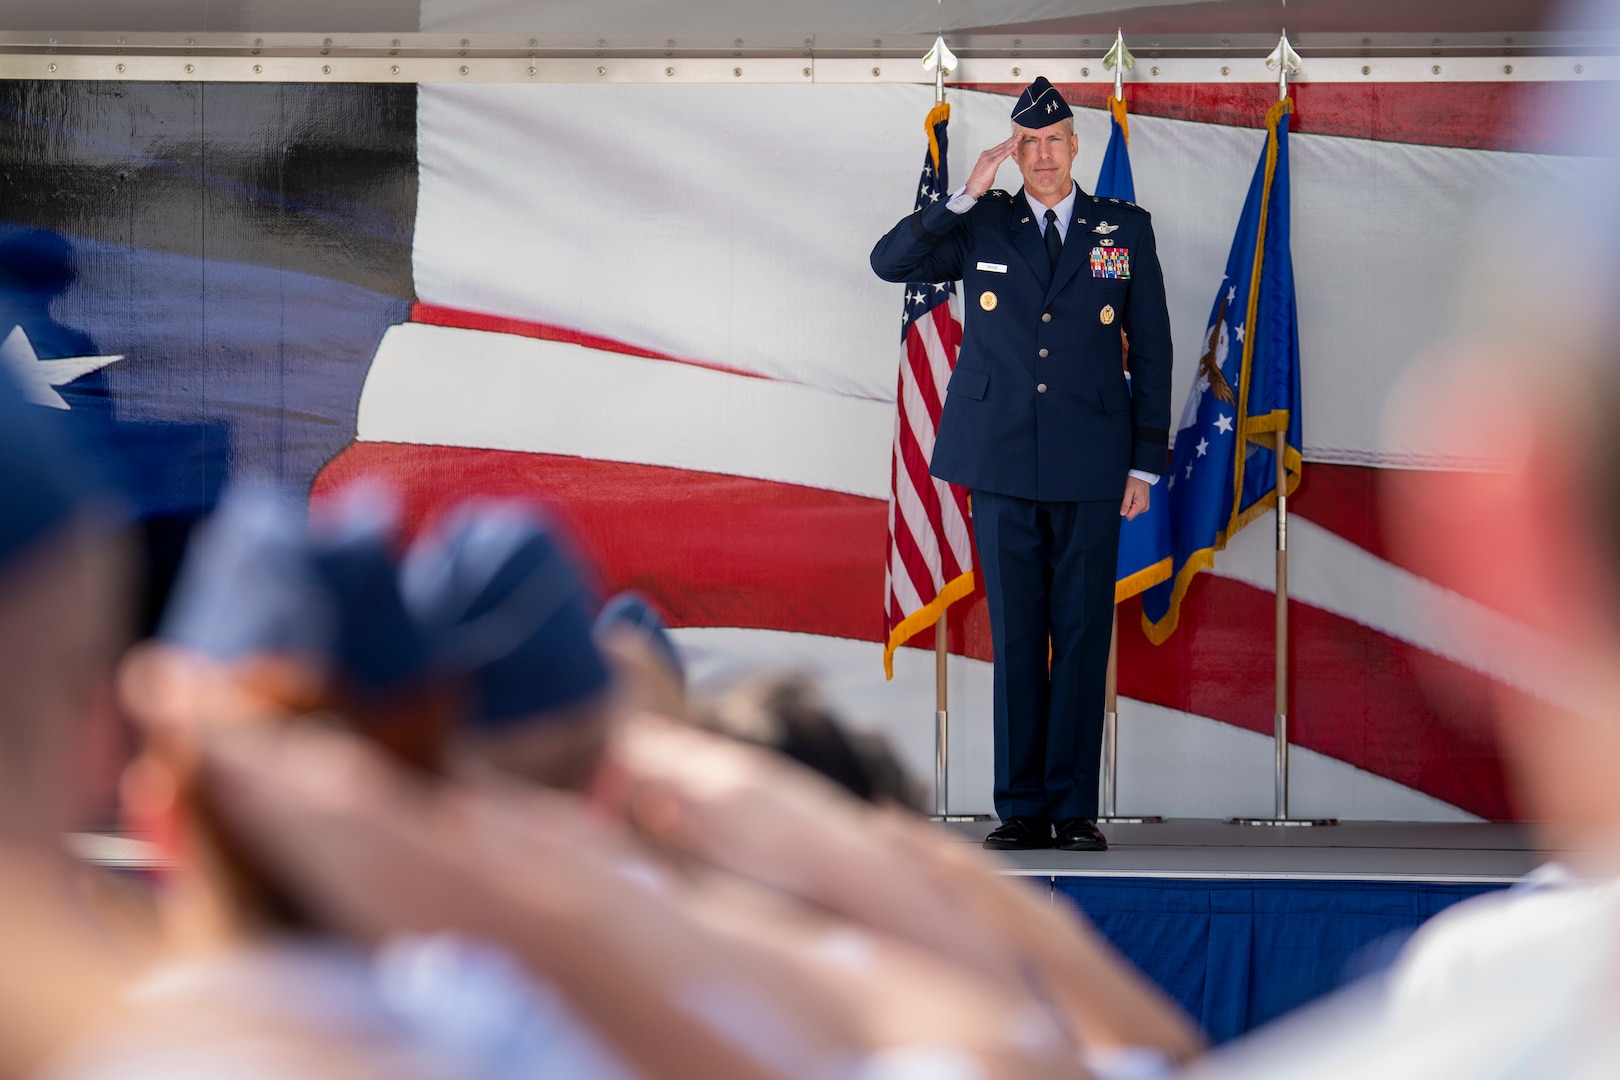 Maj. Gen. Christopher Craige receives his final salute prior to
relinquishing command of the Air Force's Personnel Center to Maj. Gen. Troy Dunn at Joint Base San Antonio-Randolph, Texas, May 18, 2022.